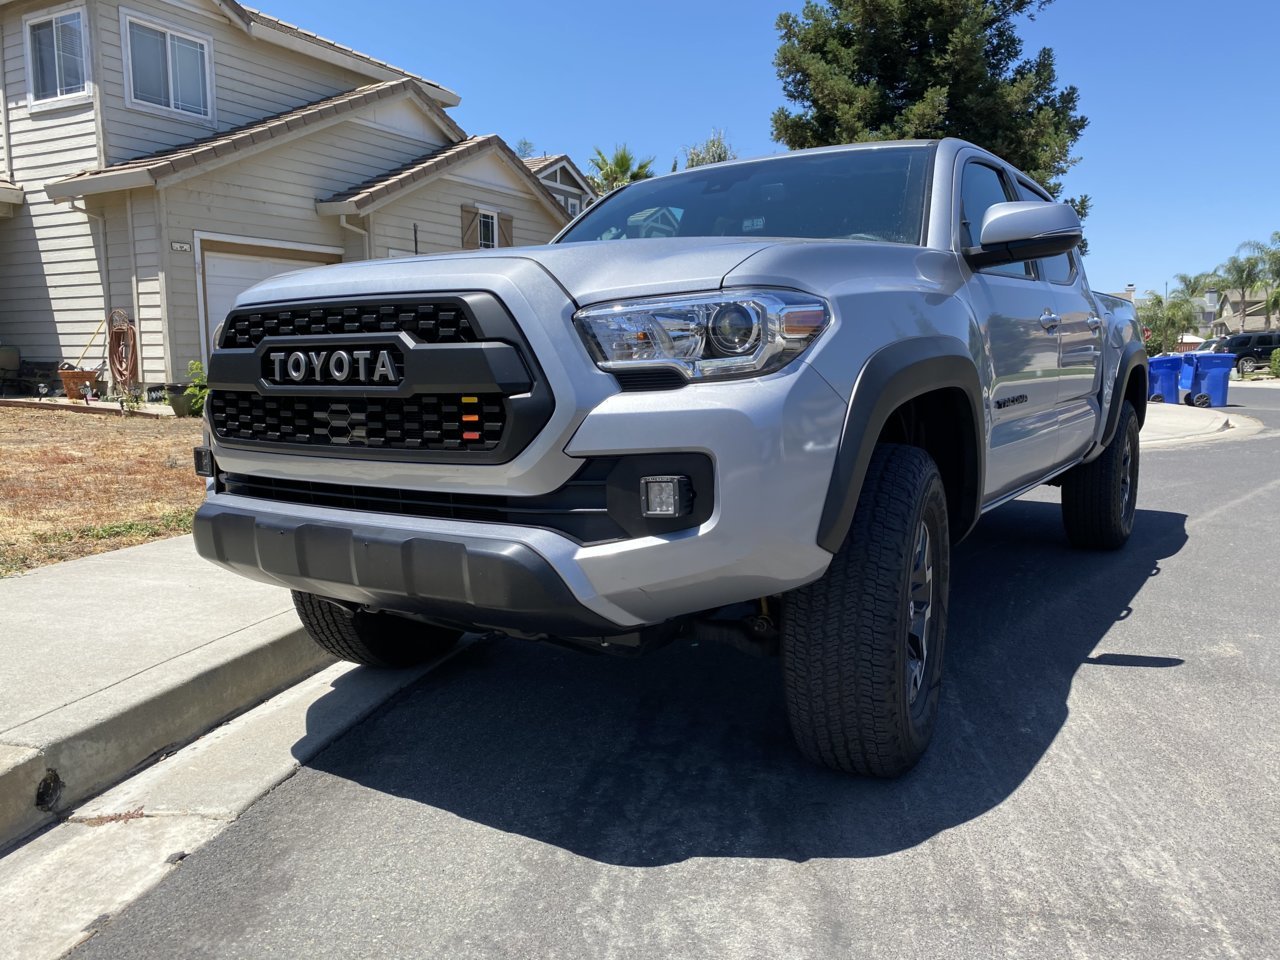 I just love this truck | Page 3 | Tacoma World